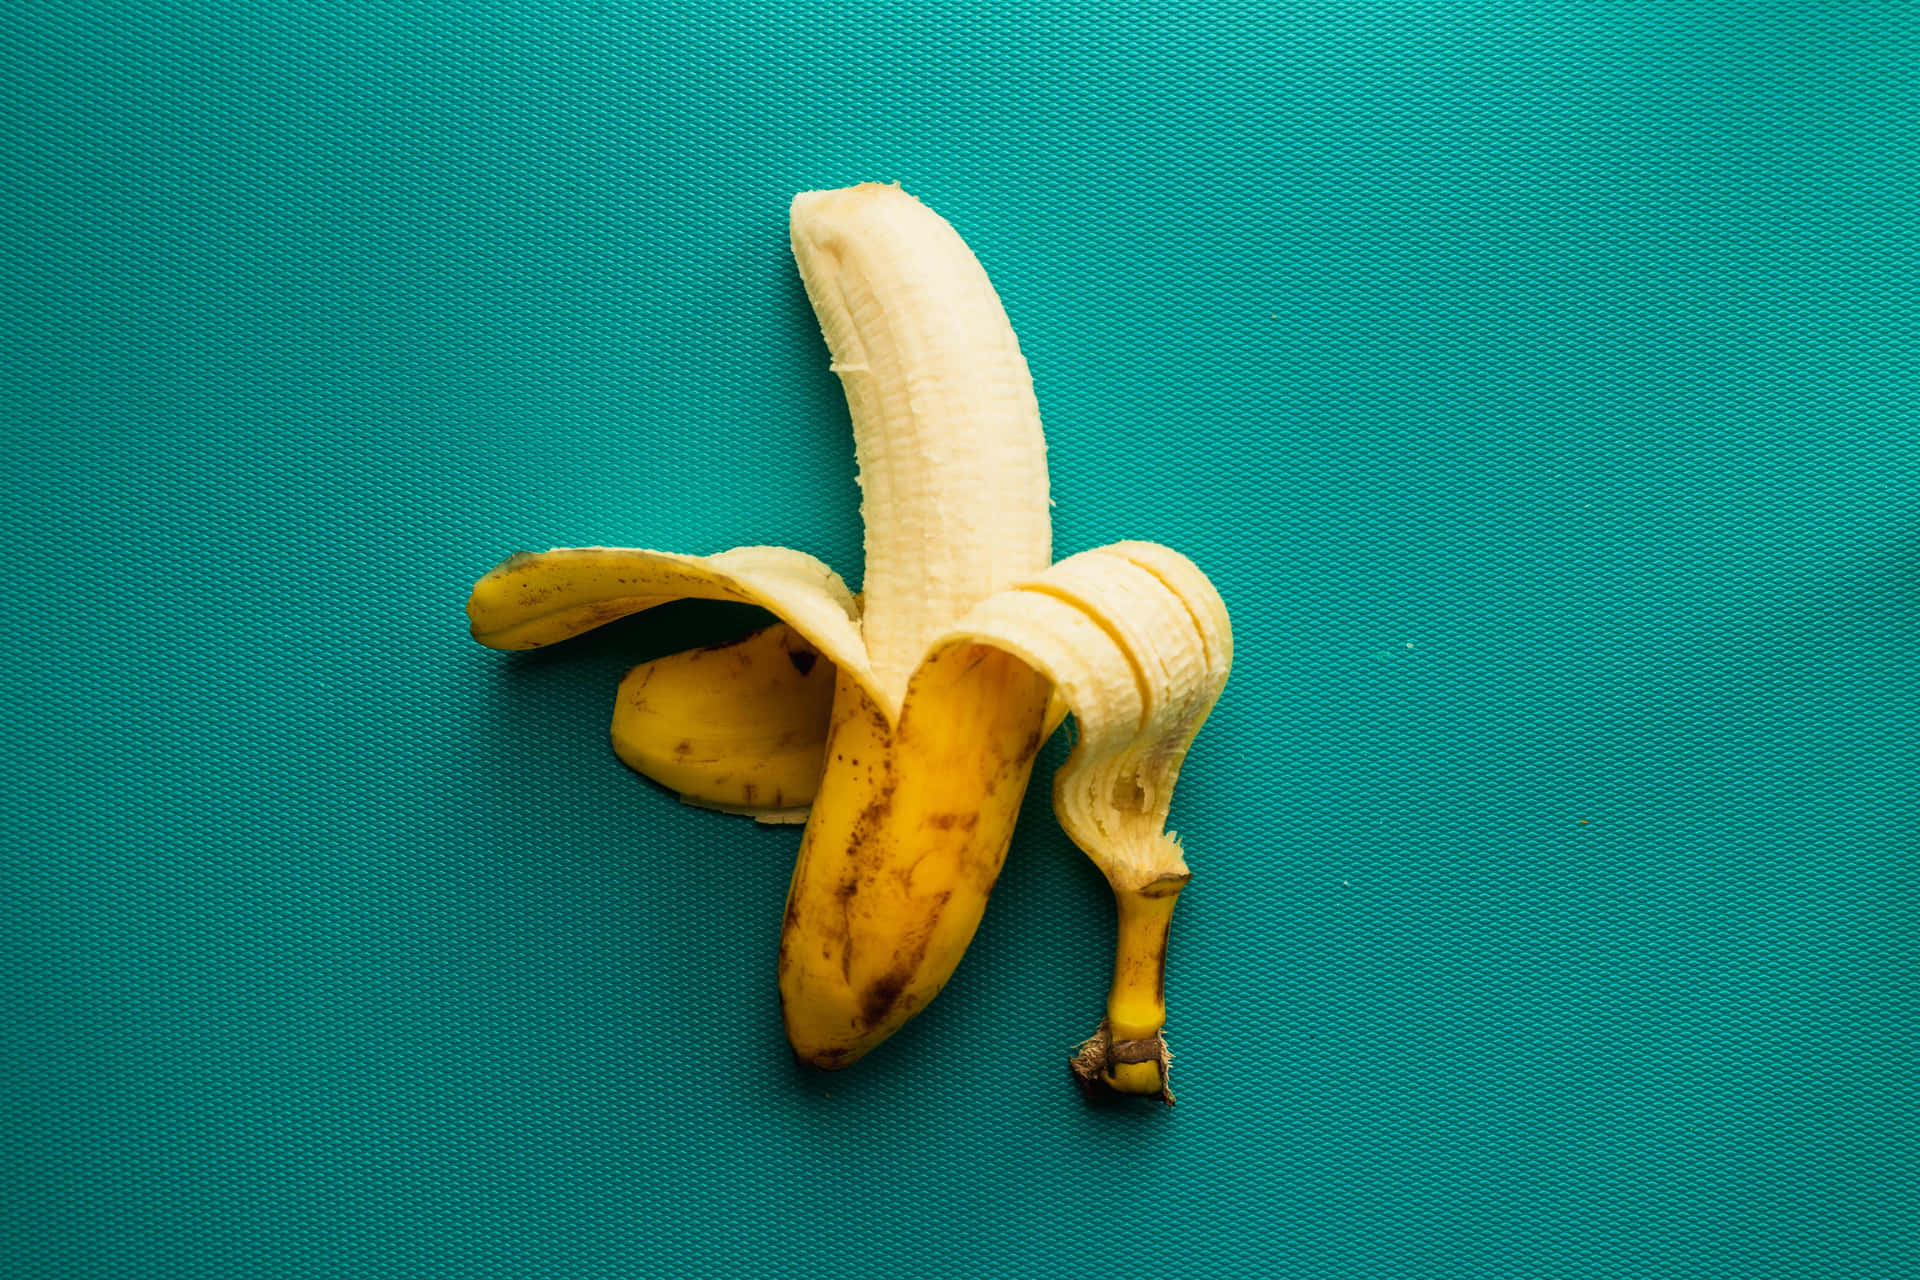 This juicy banana sits atop a brown wooden background